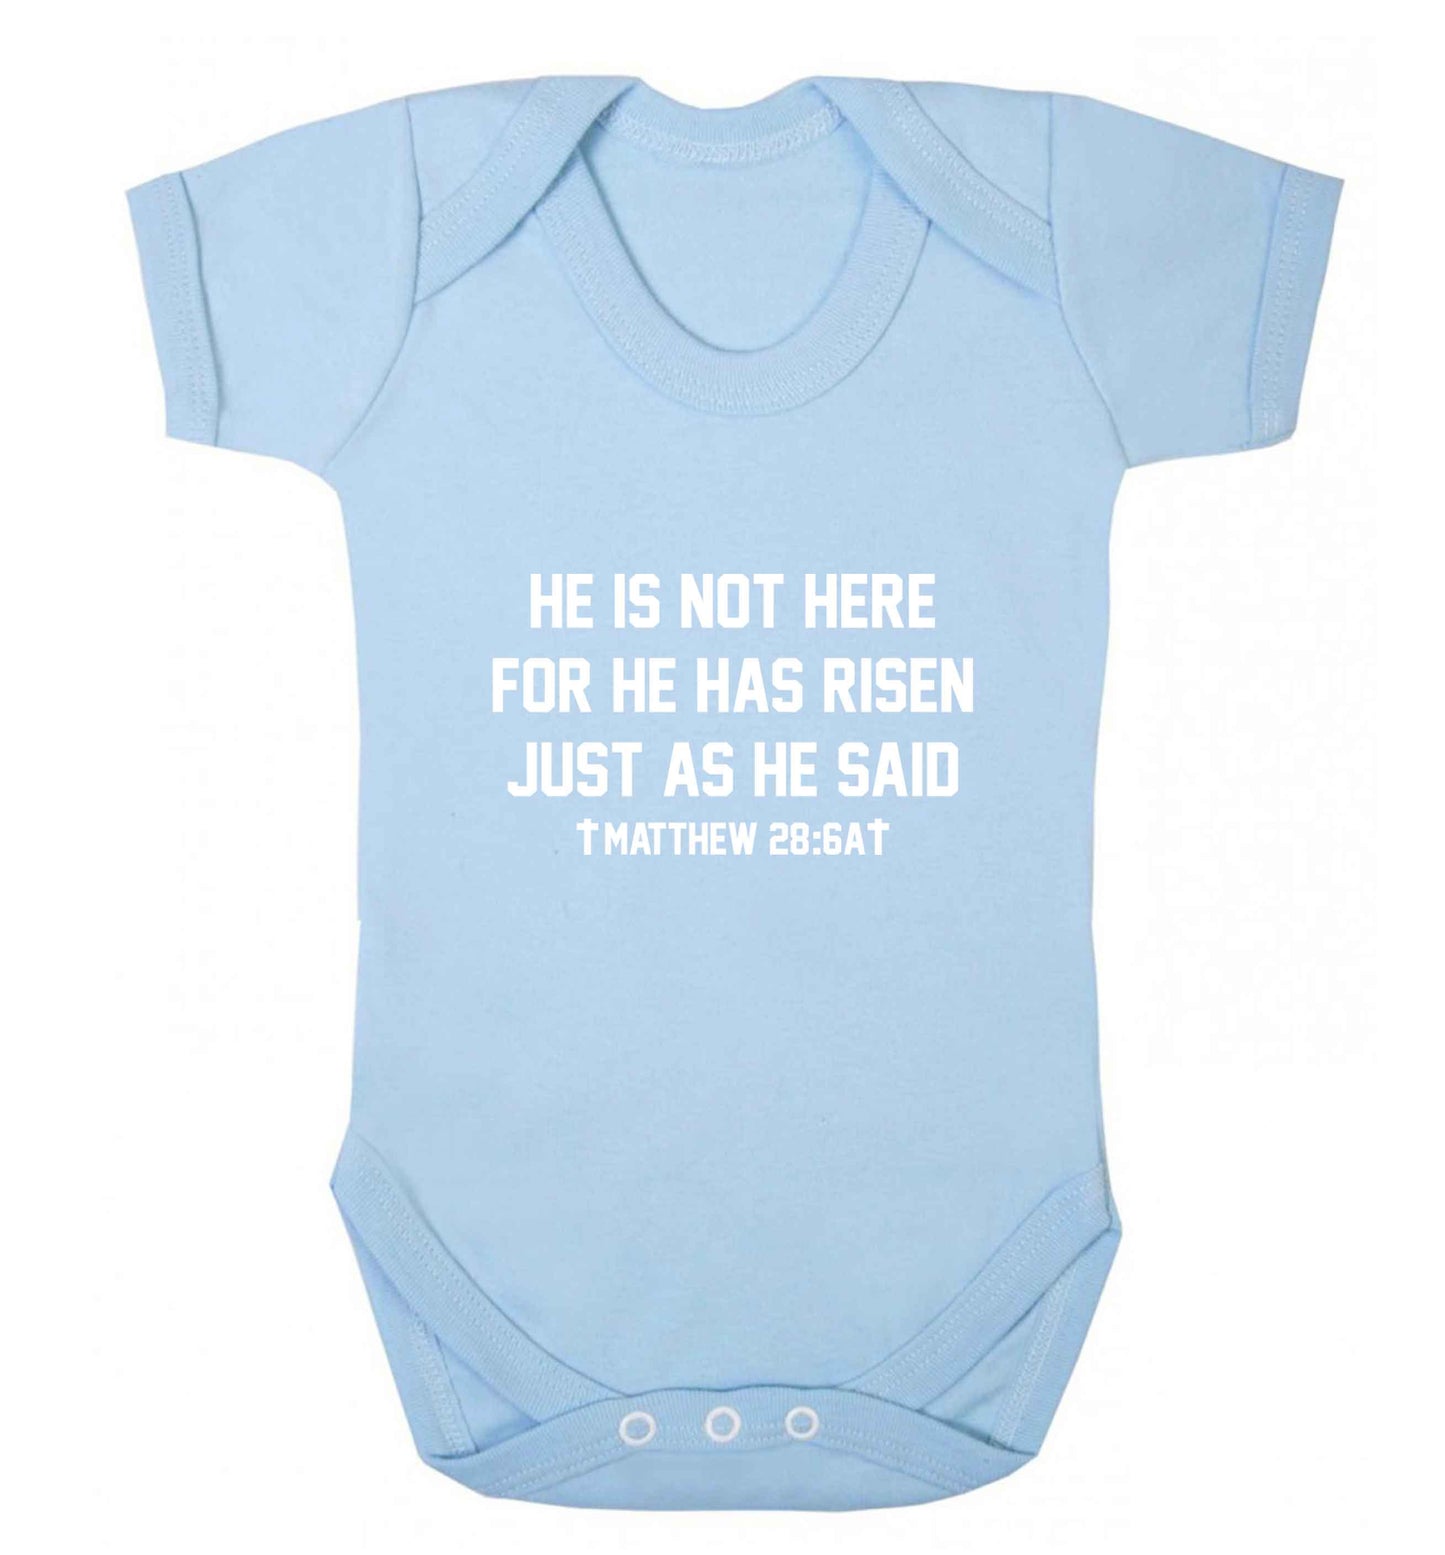 He is not here for he has risen just as he said matthew 28:6A baby vest pale blue 18-24 months